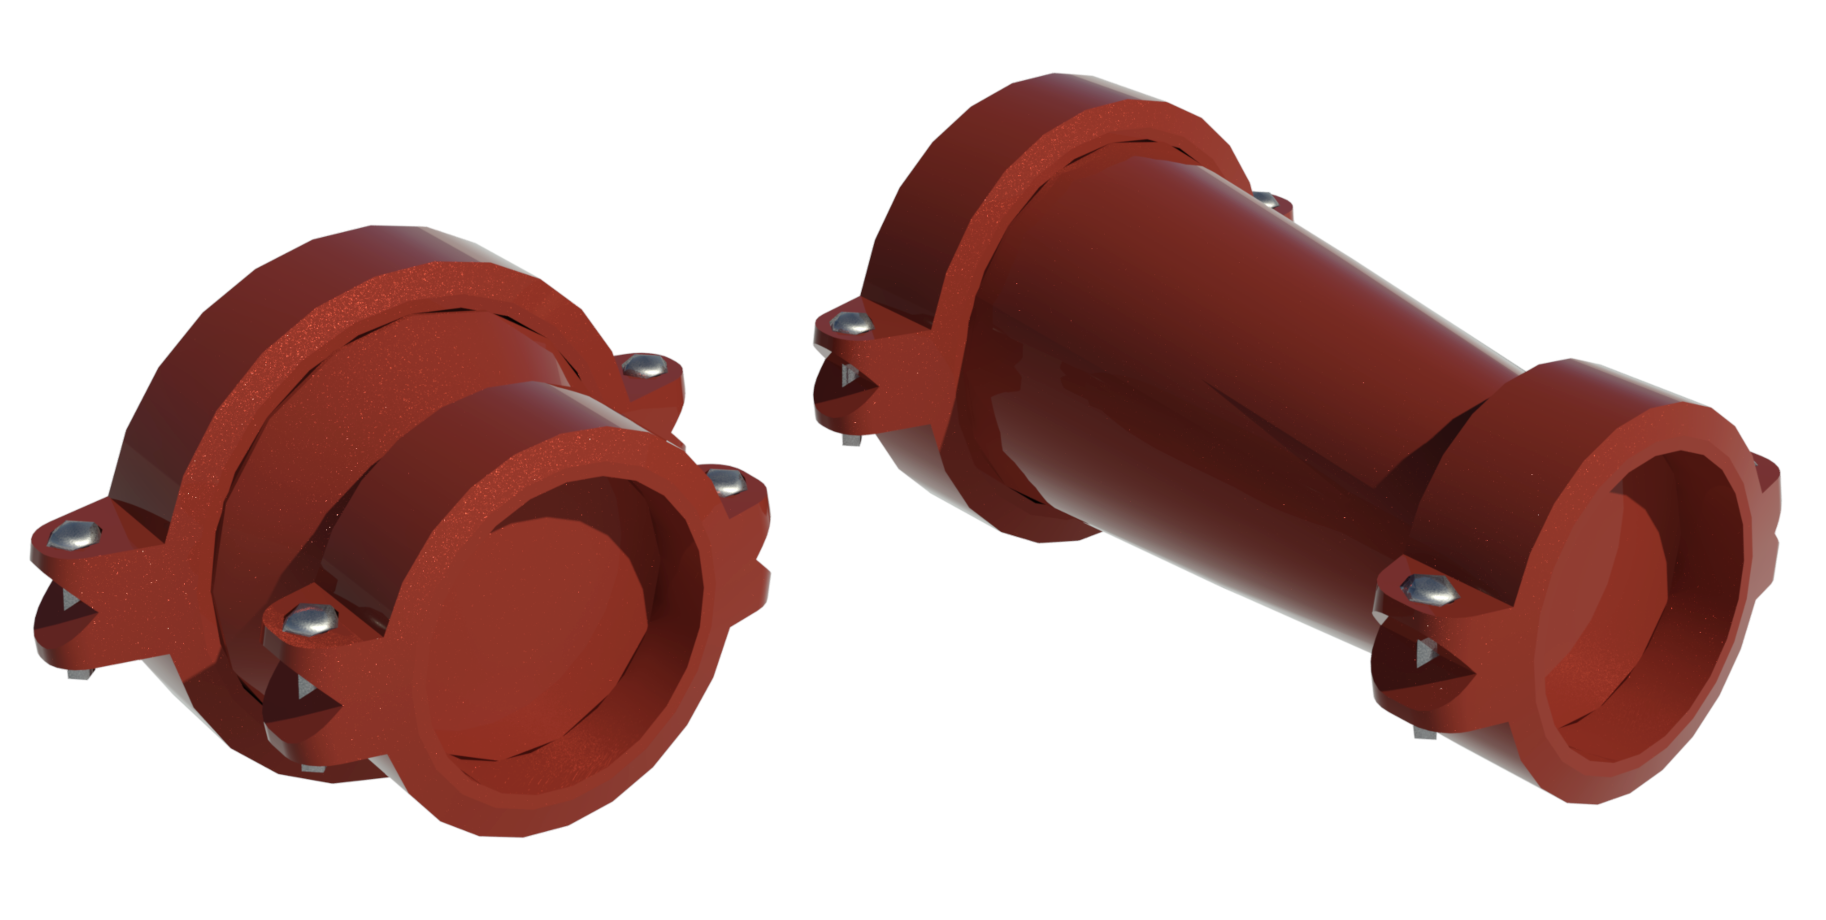 Revit family for Grinnell concentric and eccentric reducers.